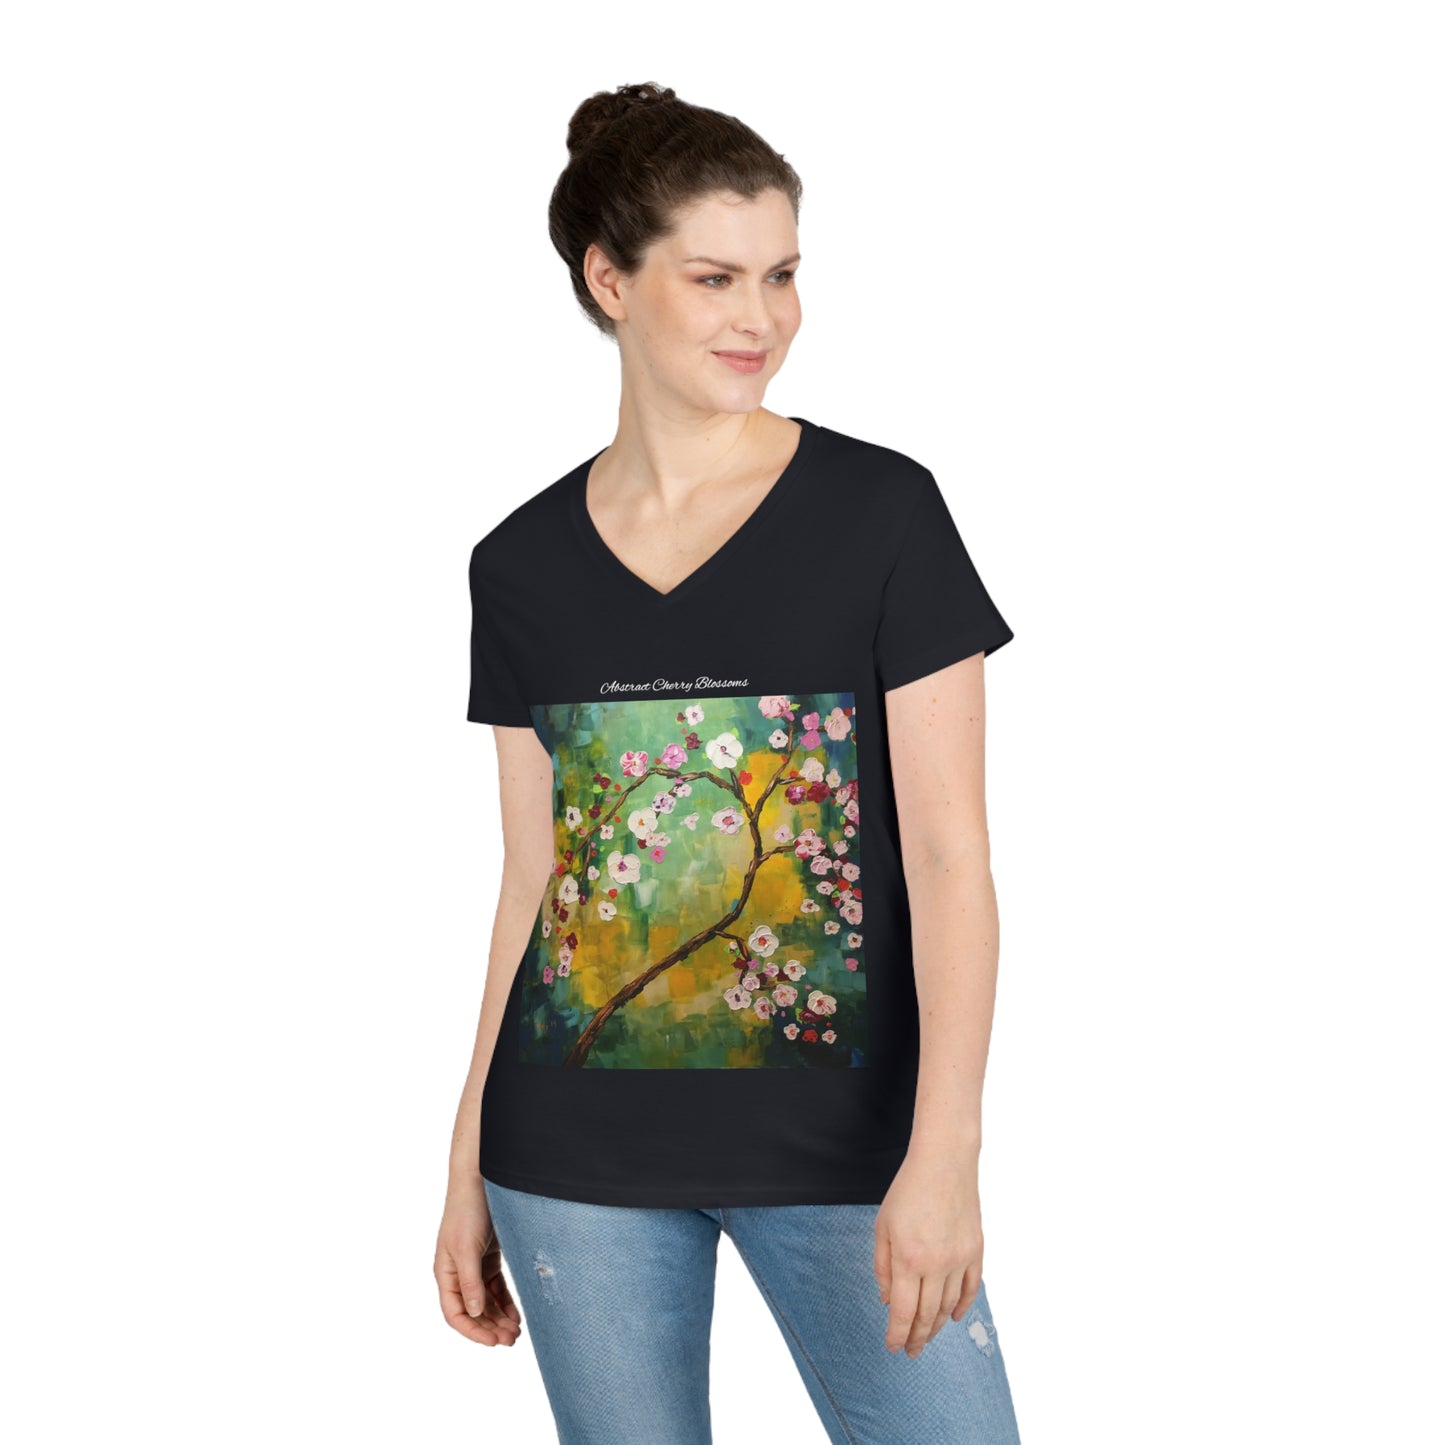 Abstract Cherry Blossoms Ladies' V-Neck T-Shirt